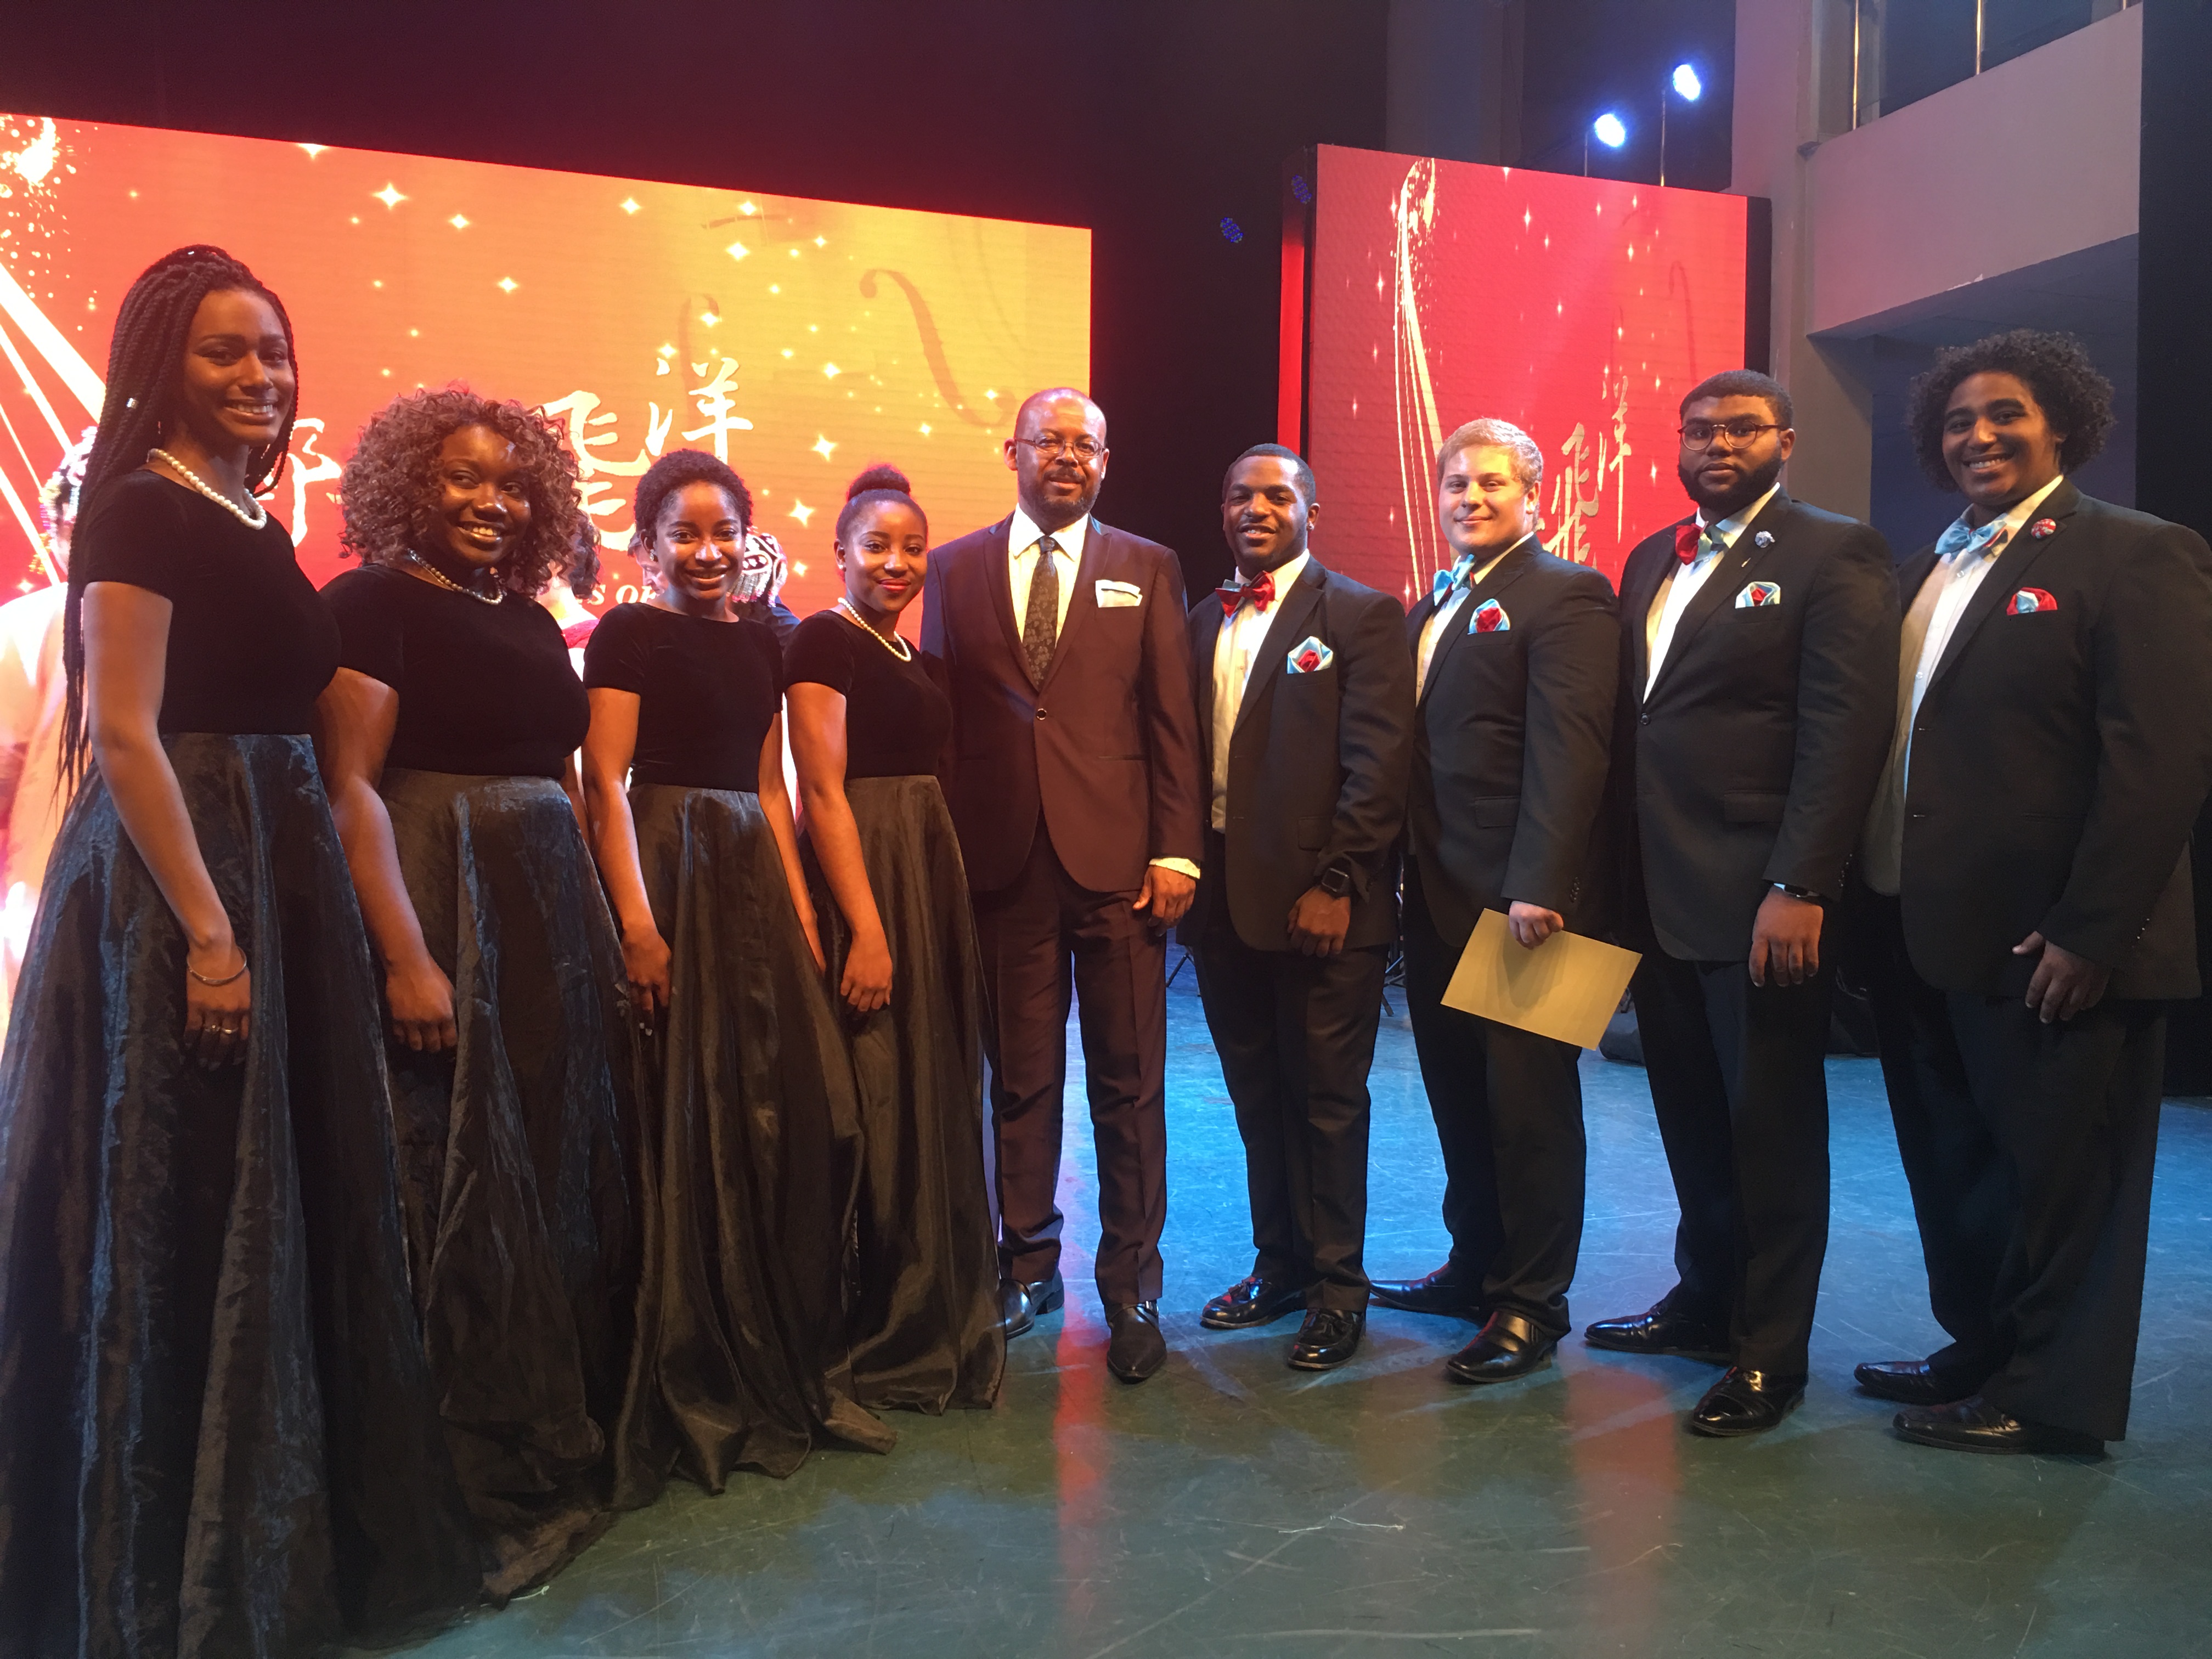 The DSU Singers in China – (l-r) Chelsea Taylor, Jaselah White, Jasmine Clementson, Cache Smith, Dr. Lloyd Mallory, Jr., Tylor Brown, Mitchell Clark, George Mensah, Jr., and Willie Shepherd.